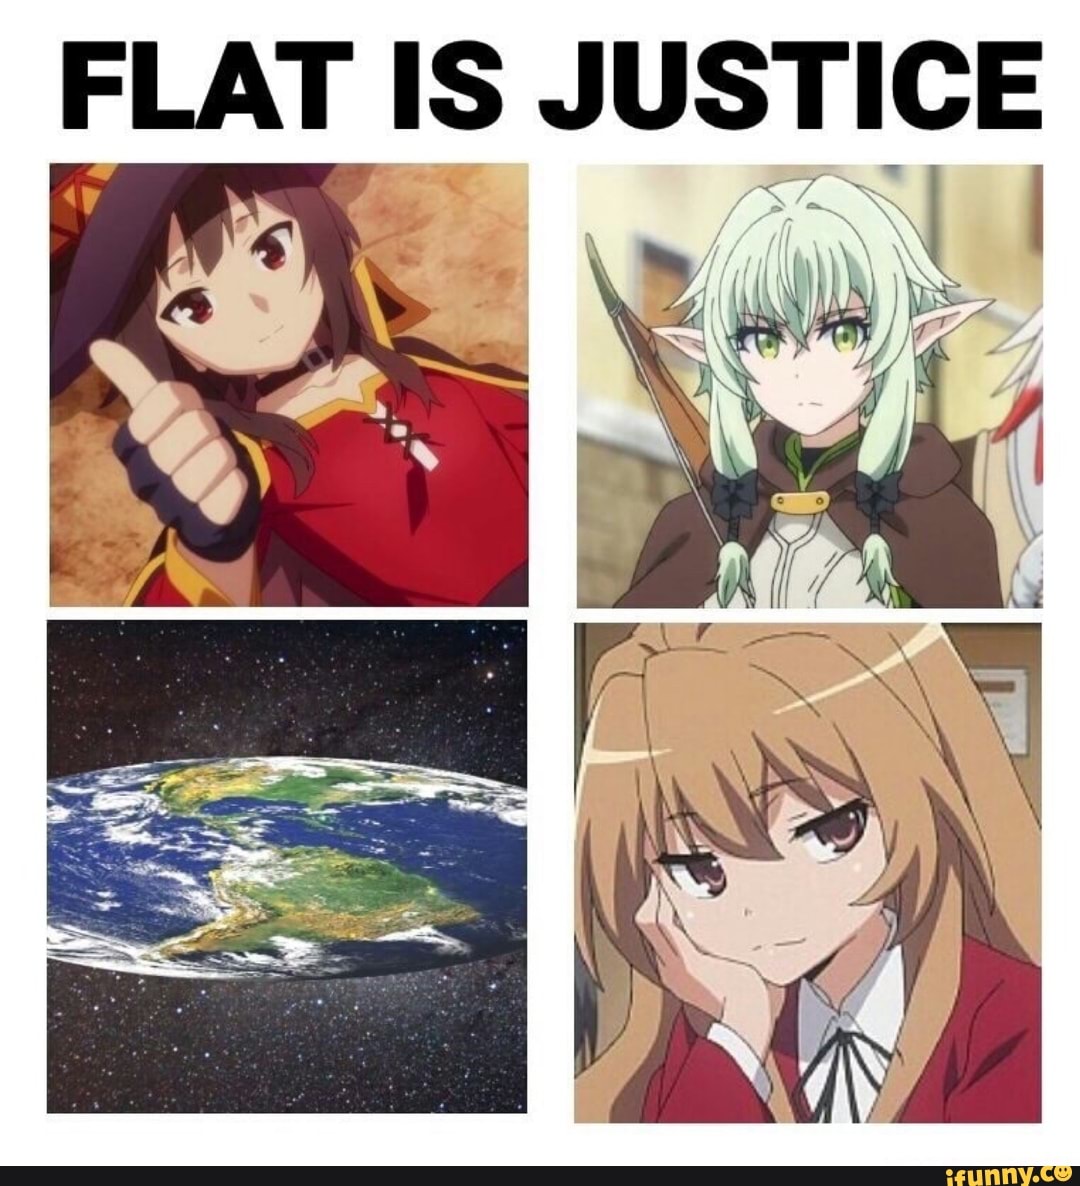 Flat is justice